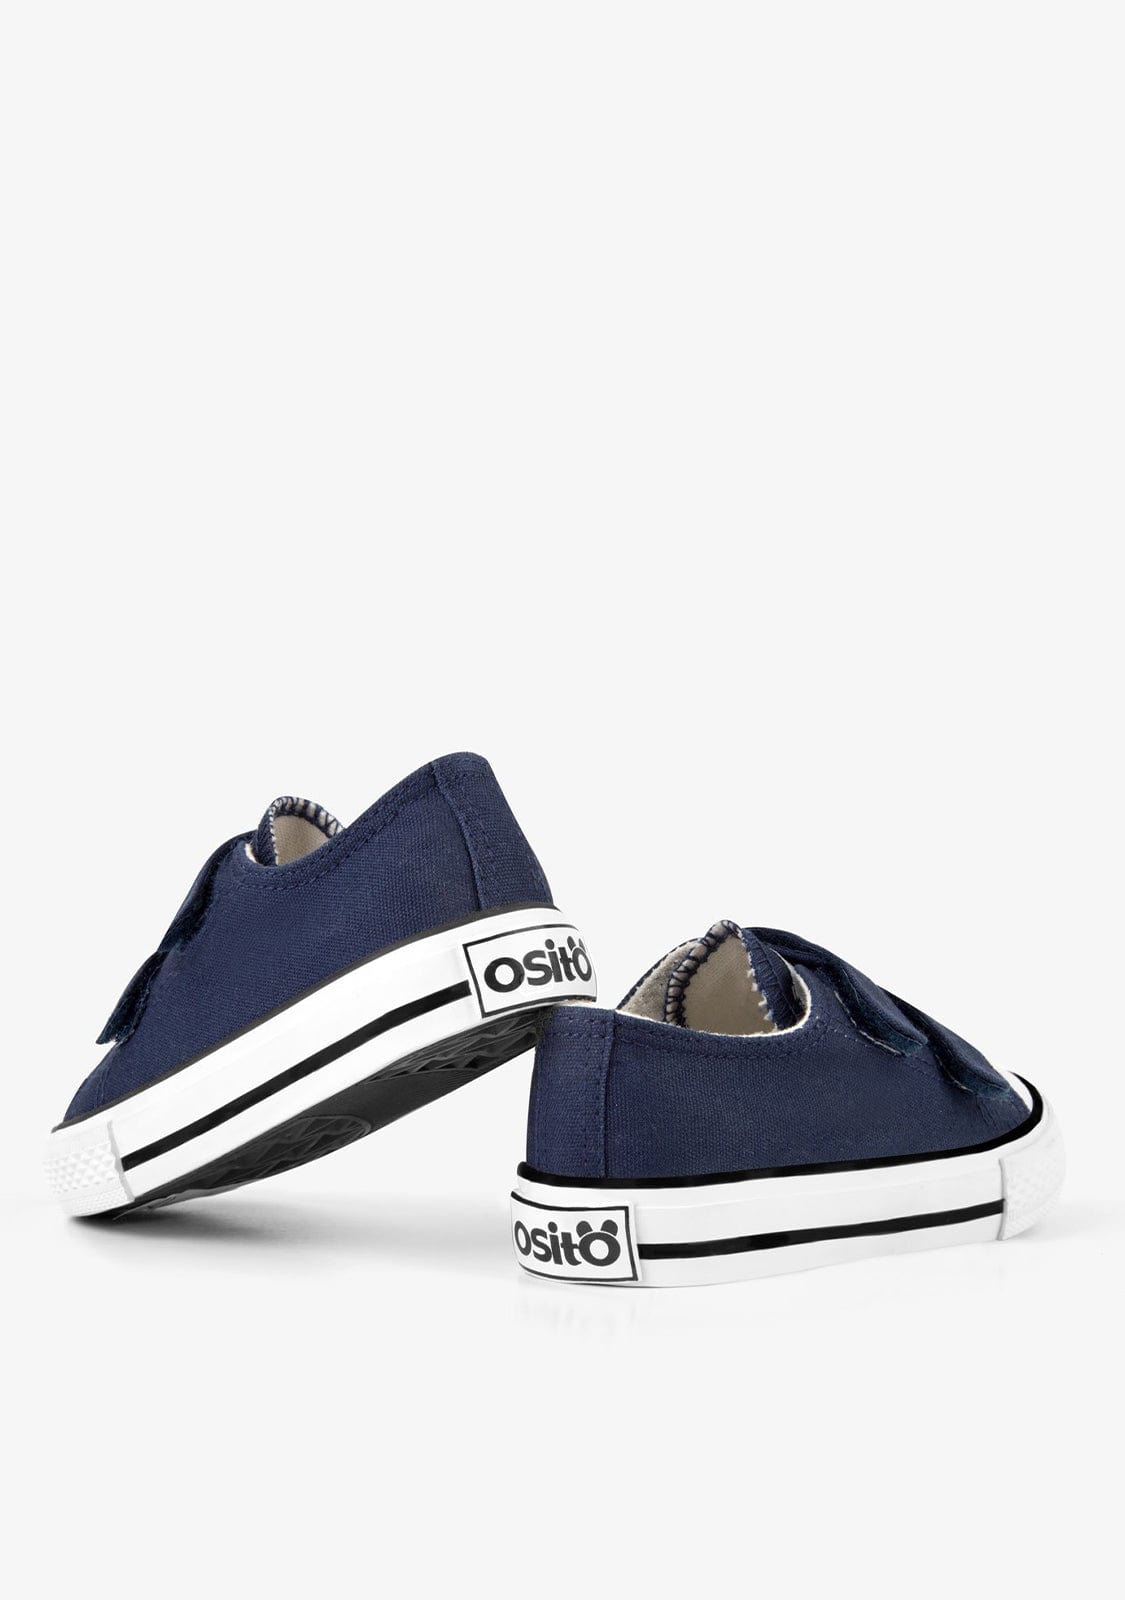 OSITO Shoes Baby's Navy Adherent Strips Sneakers Canvas